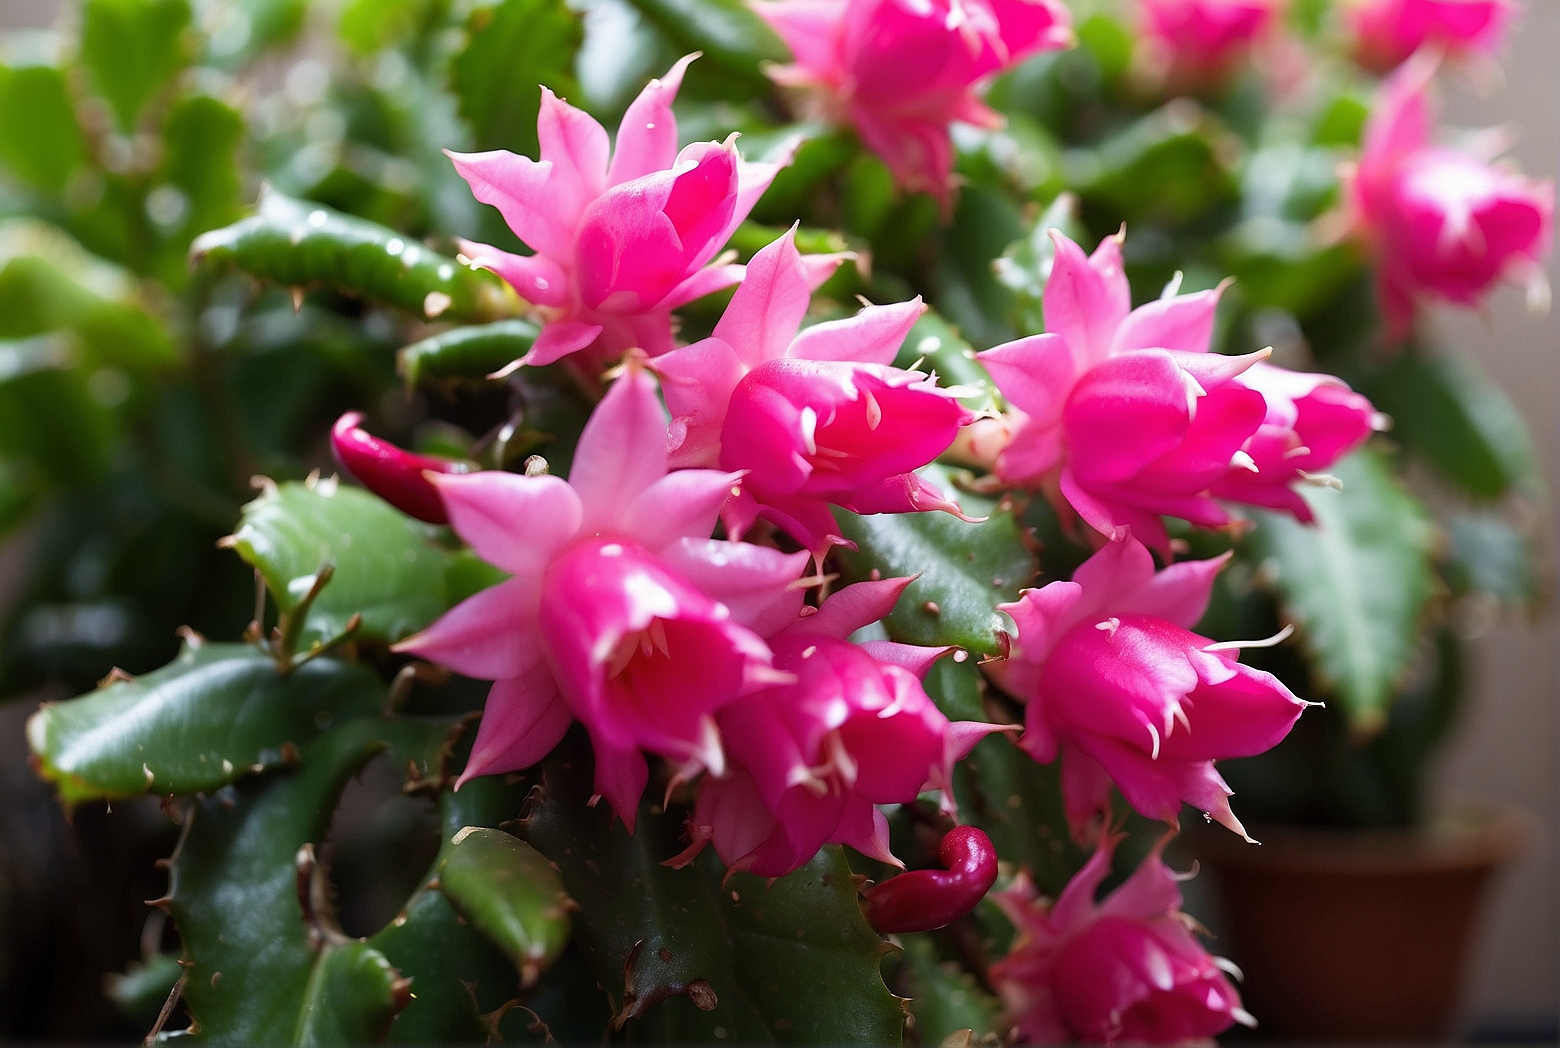 Pruning Techniques for Christmas Cactus